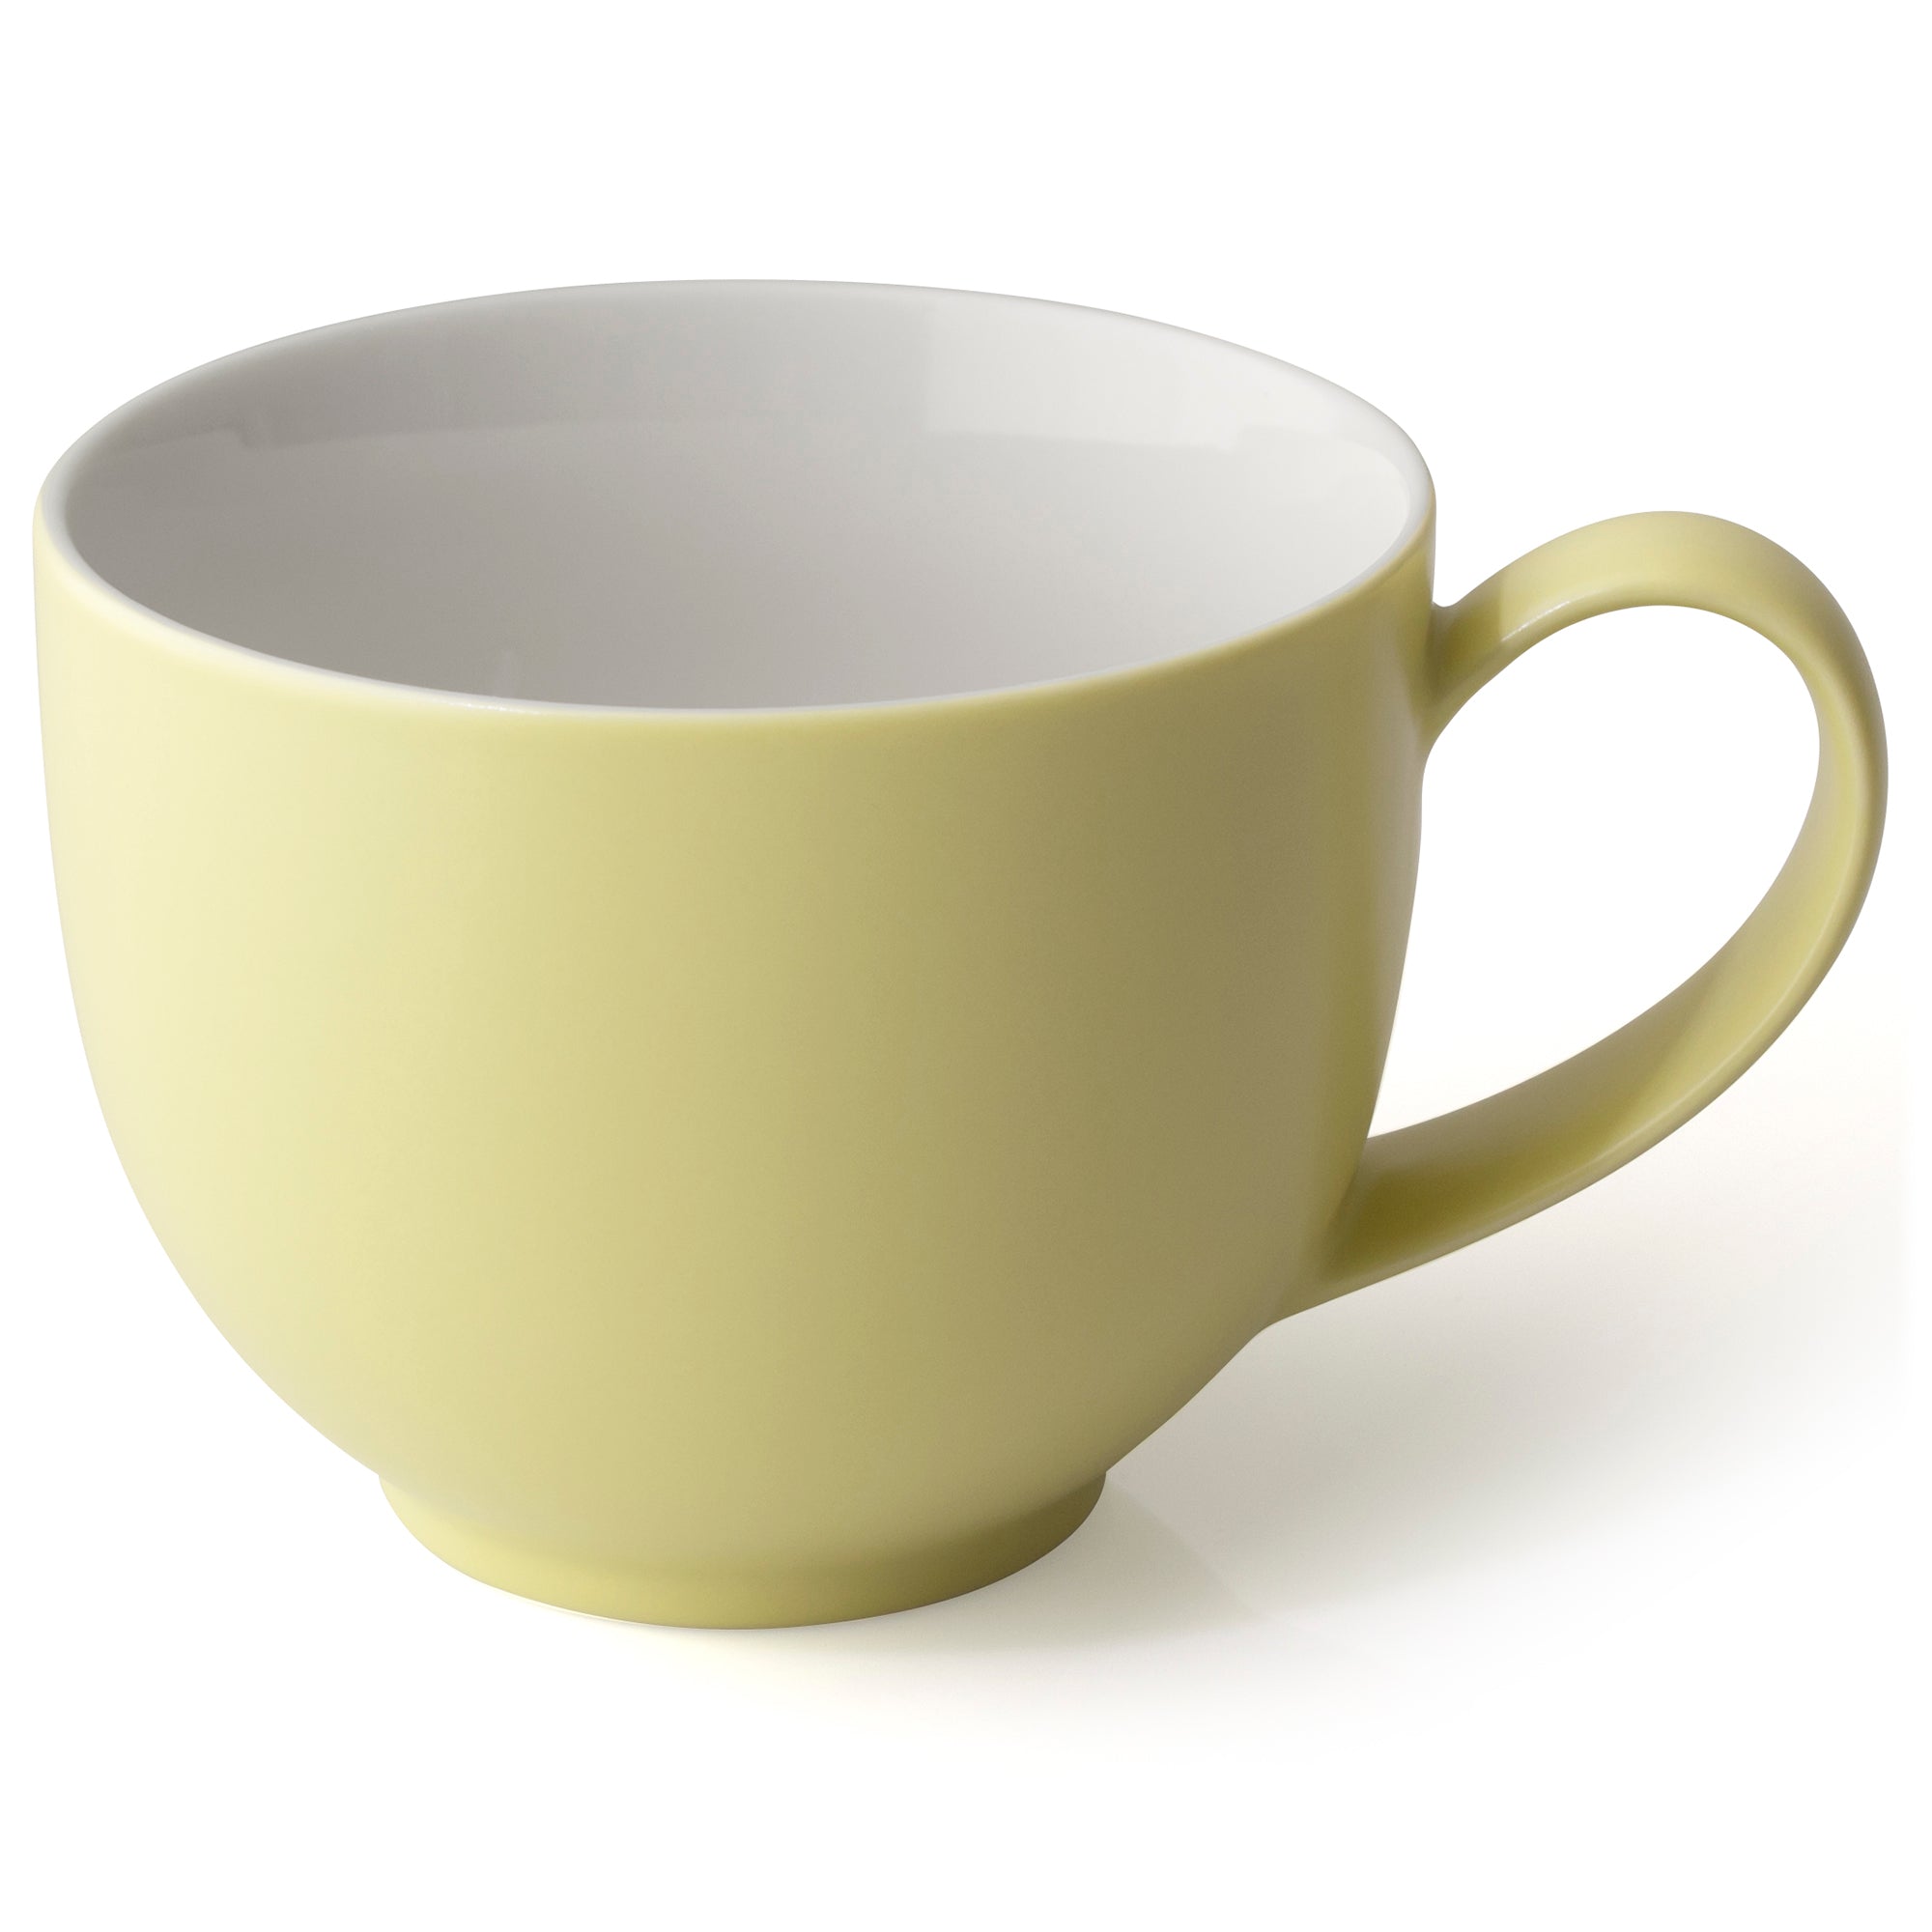 Q Tea Cup with Handle - 10 oz., 4 pc pack